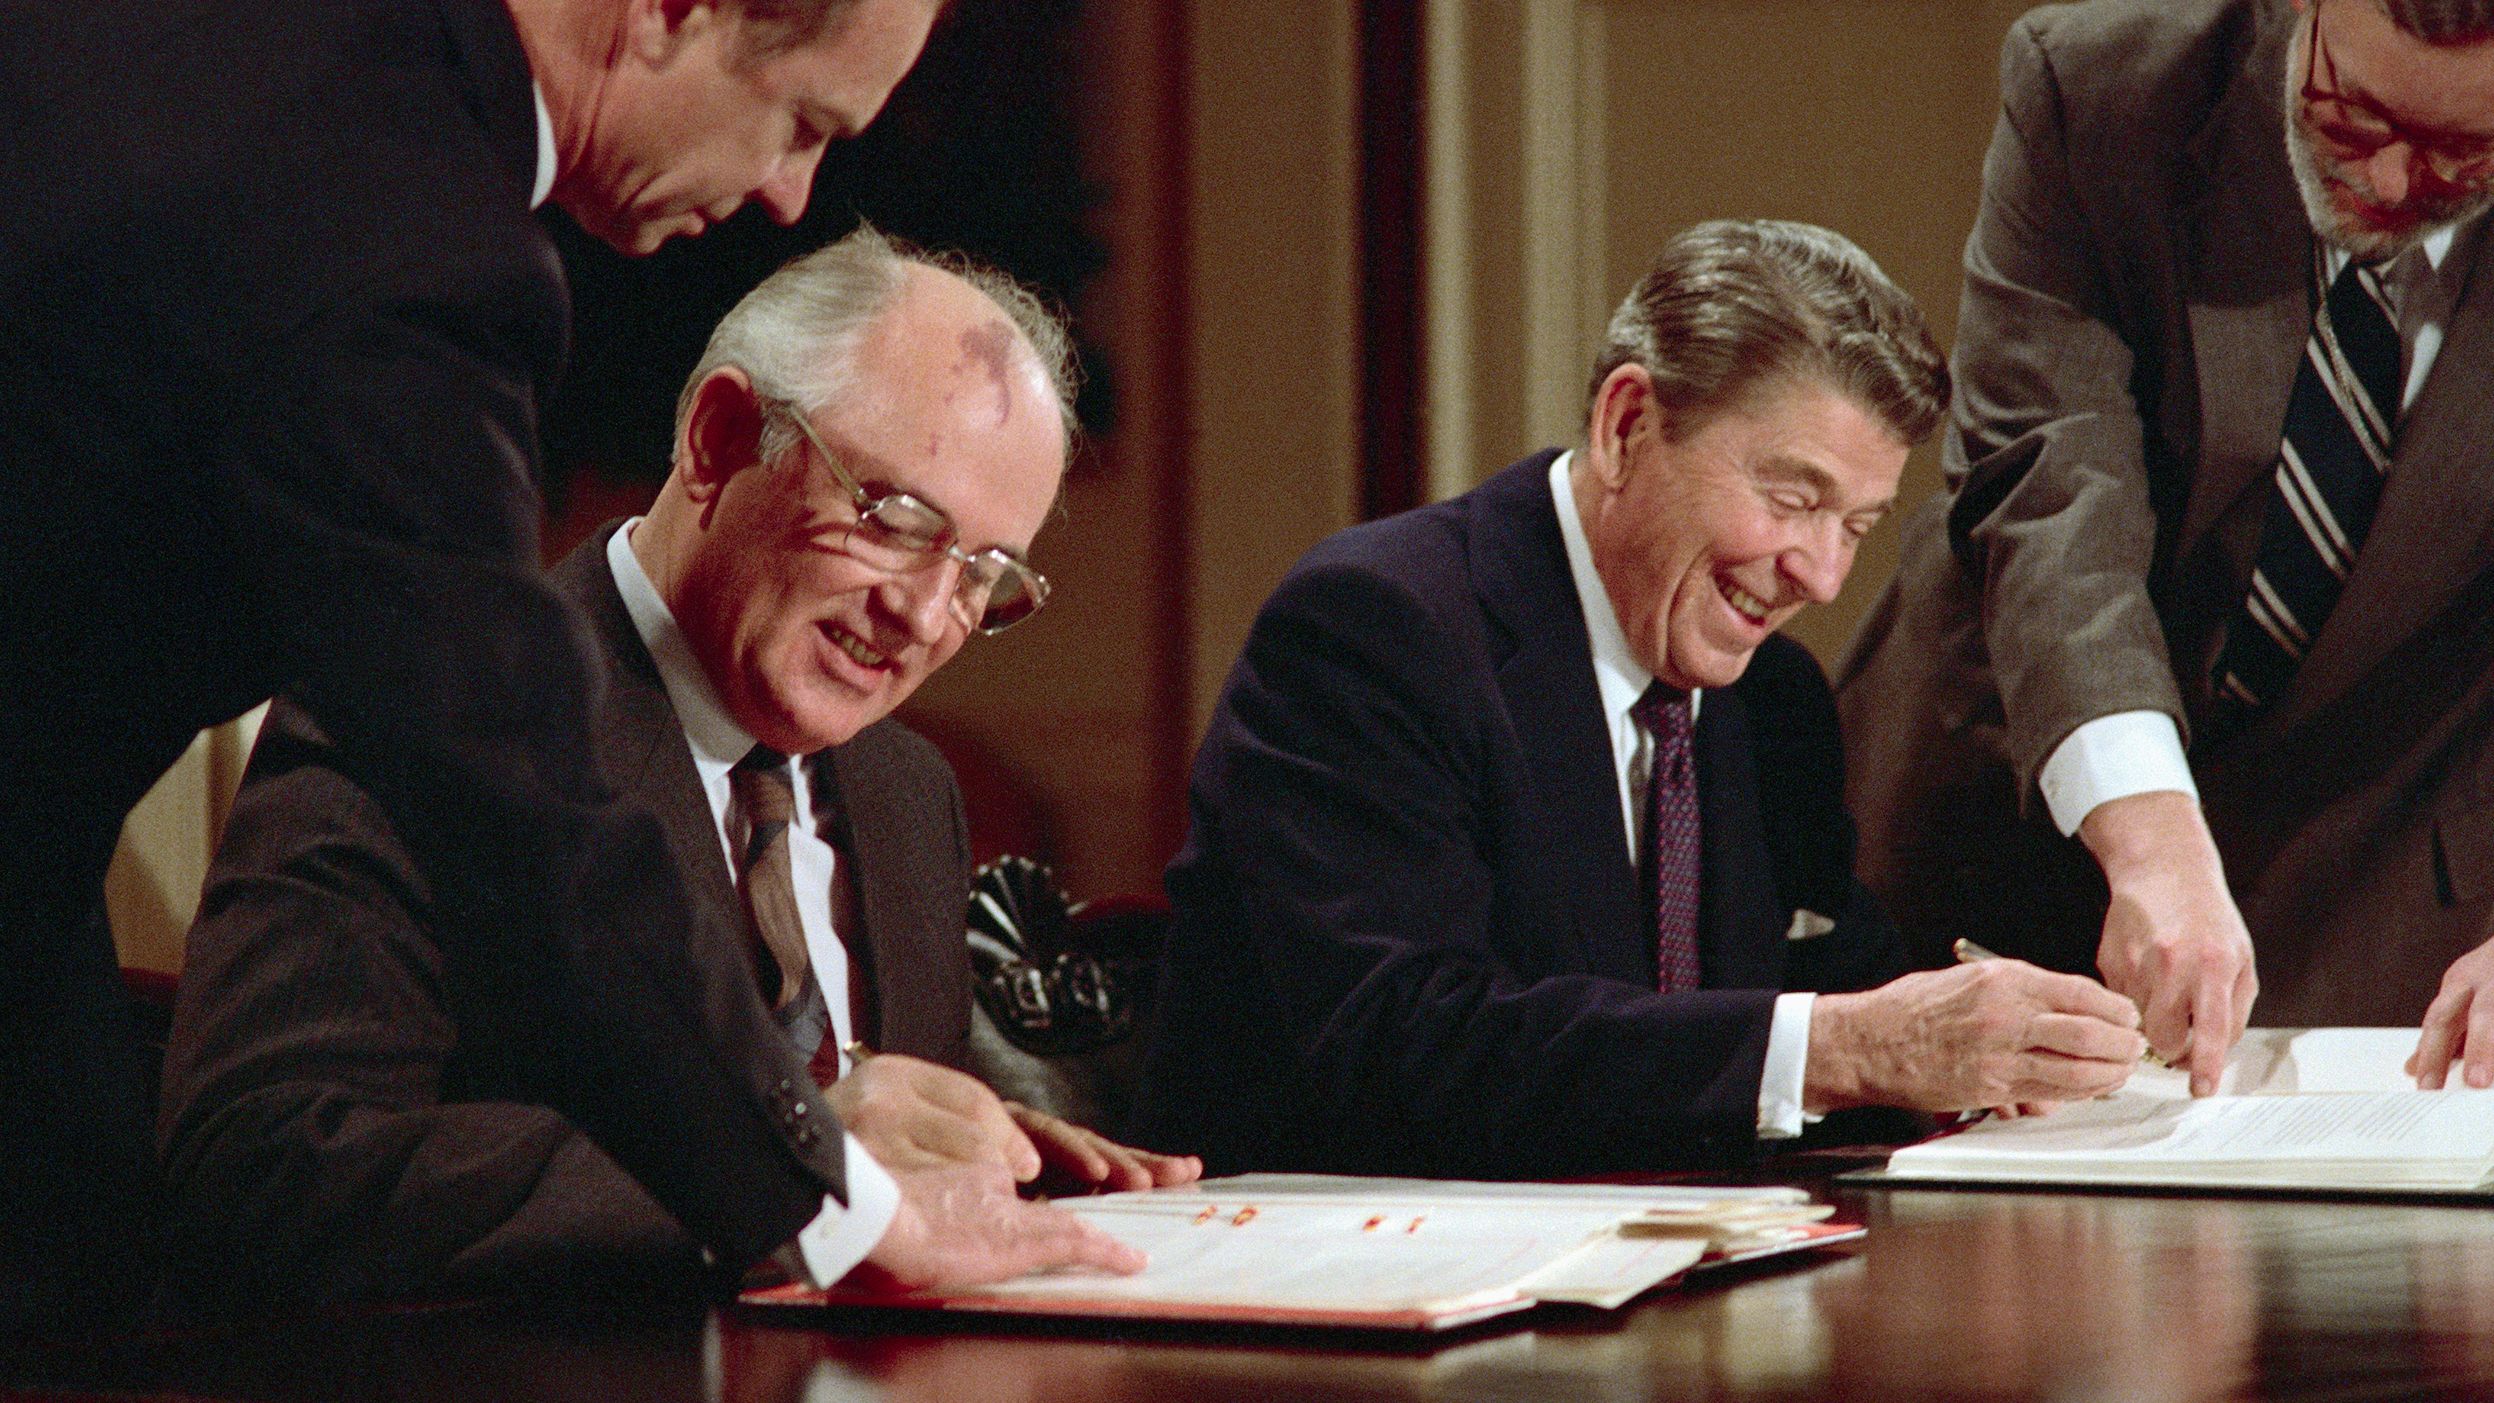 Gorbachev and Reagan sign an arms control agreement in December 1987 banning the use of intermediate-range nuclear missiles.